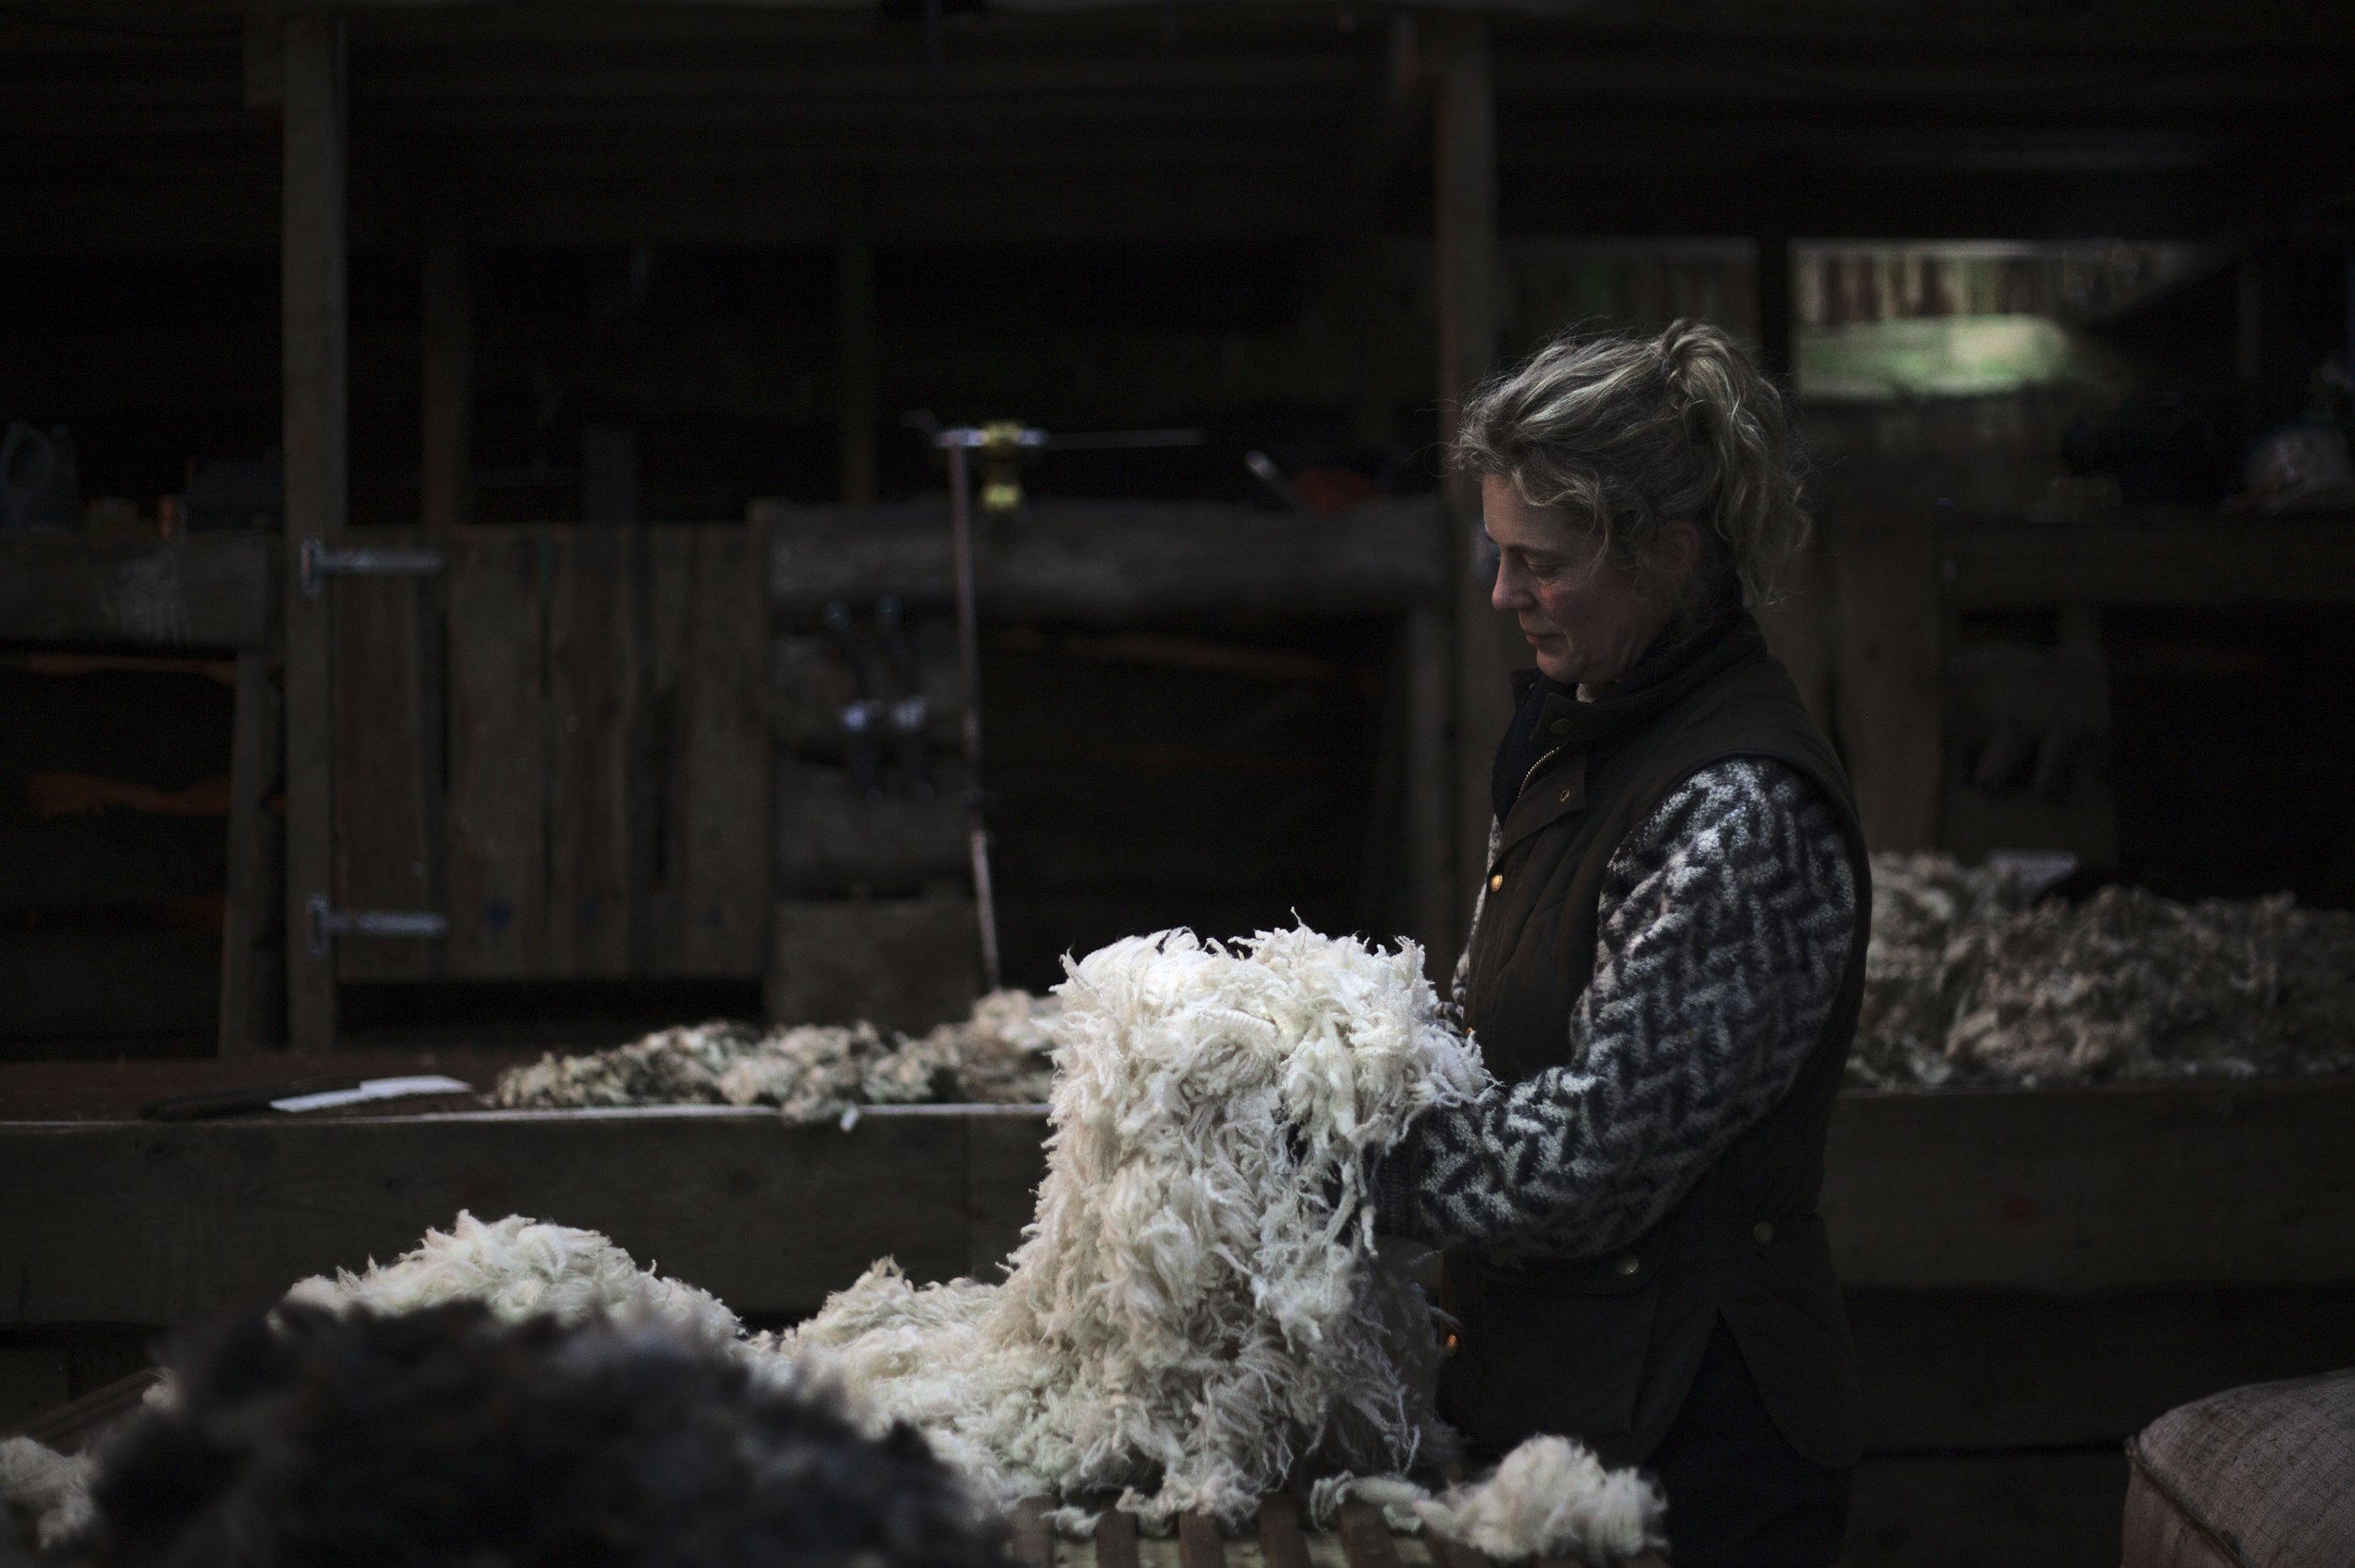  The Fernhill philosophy holds no waste at its core; great care is taken to sort and grade each fleece after shearing to ensure that the very most is made of all of it, and all by-products are seen as resources that can somehow be recycled within the